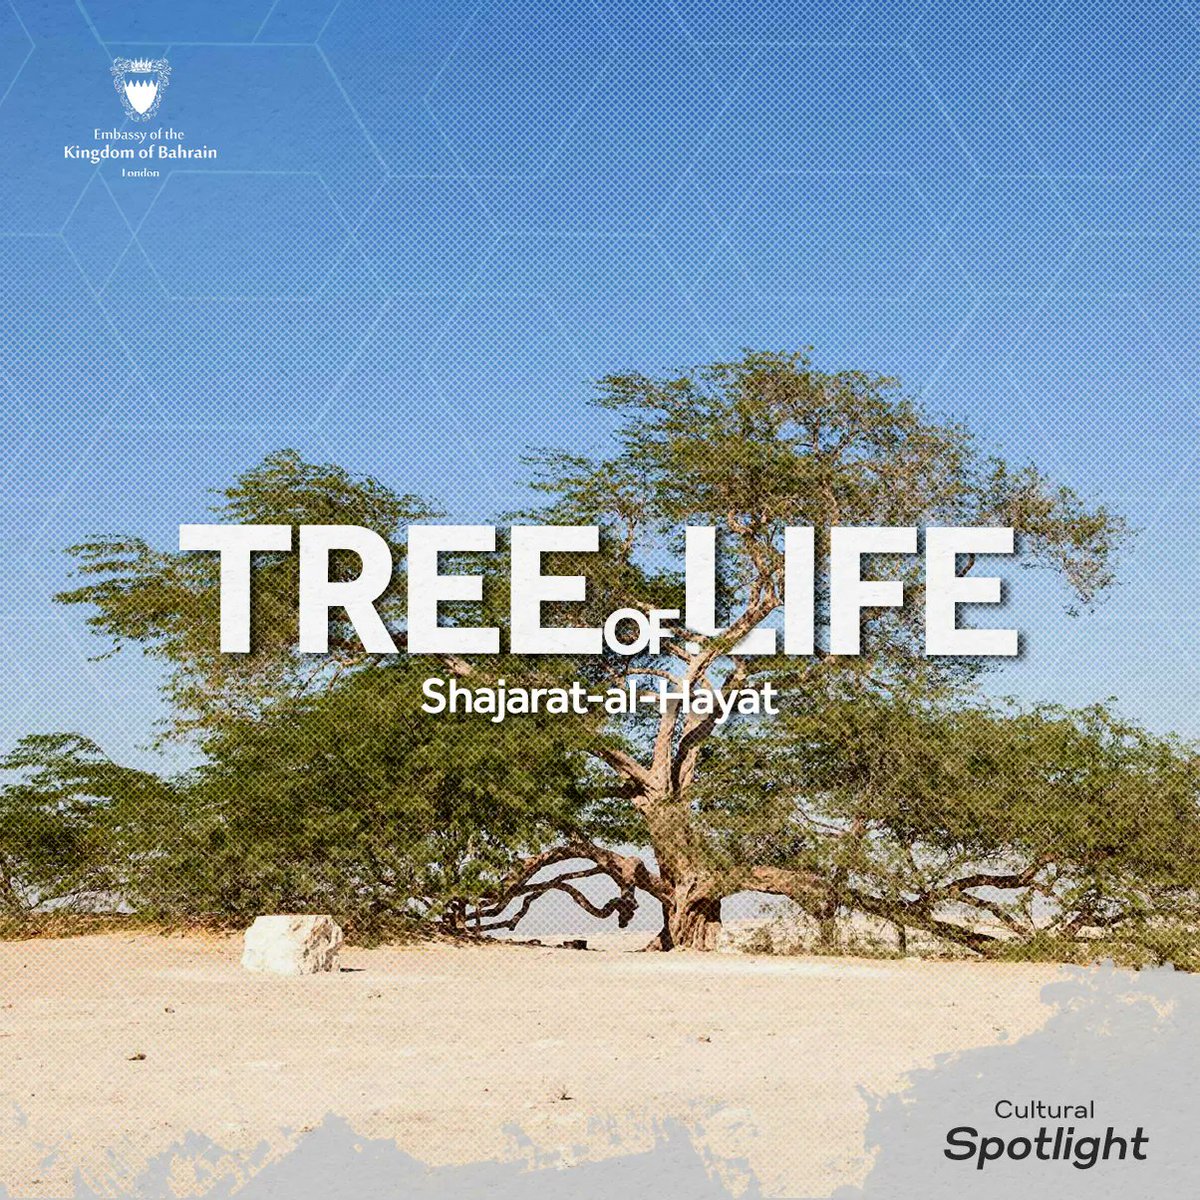 #CulturalSpotlight I The Tree of Life or Shajarat- Al Hayat, as it is called in Arabic, is a marvel in the desert of #Bahrain. It's famous for surviving for over 100 years despite the extreme heat and the lack of water sources around the area.

@tourismbh

bit.ly/3Q5fvUY